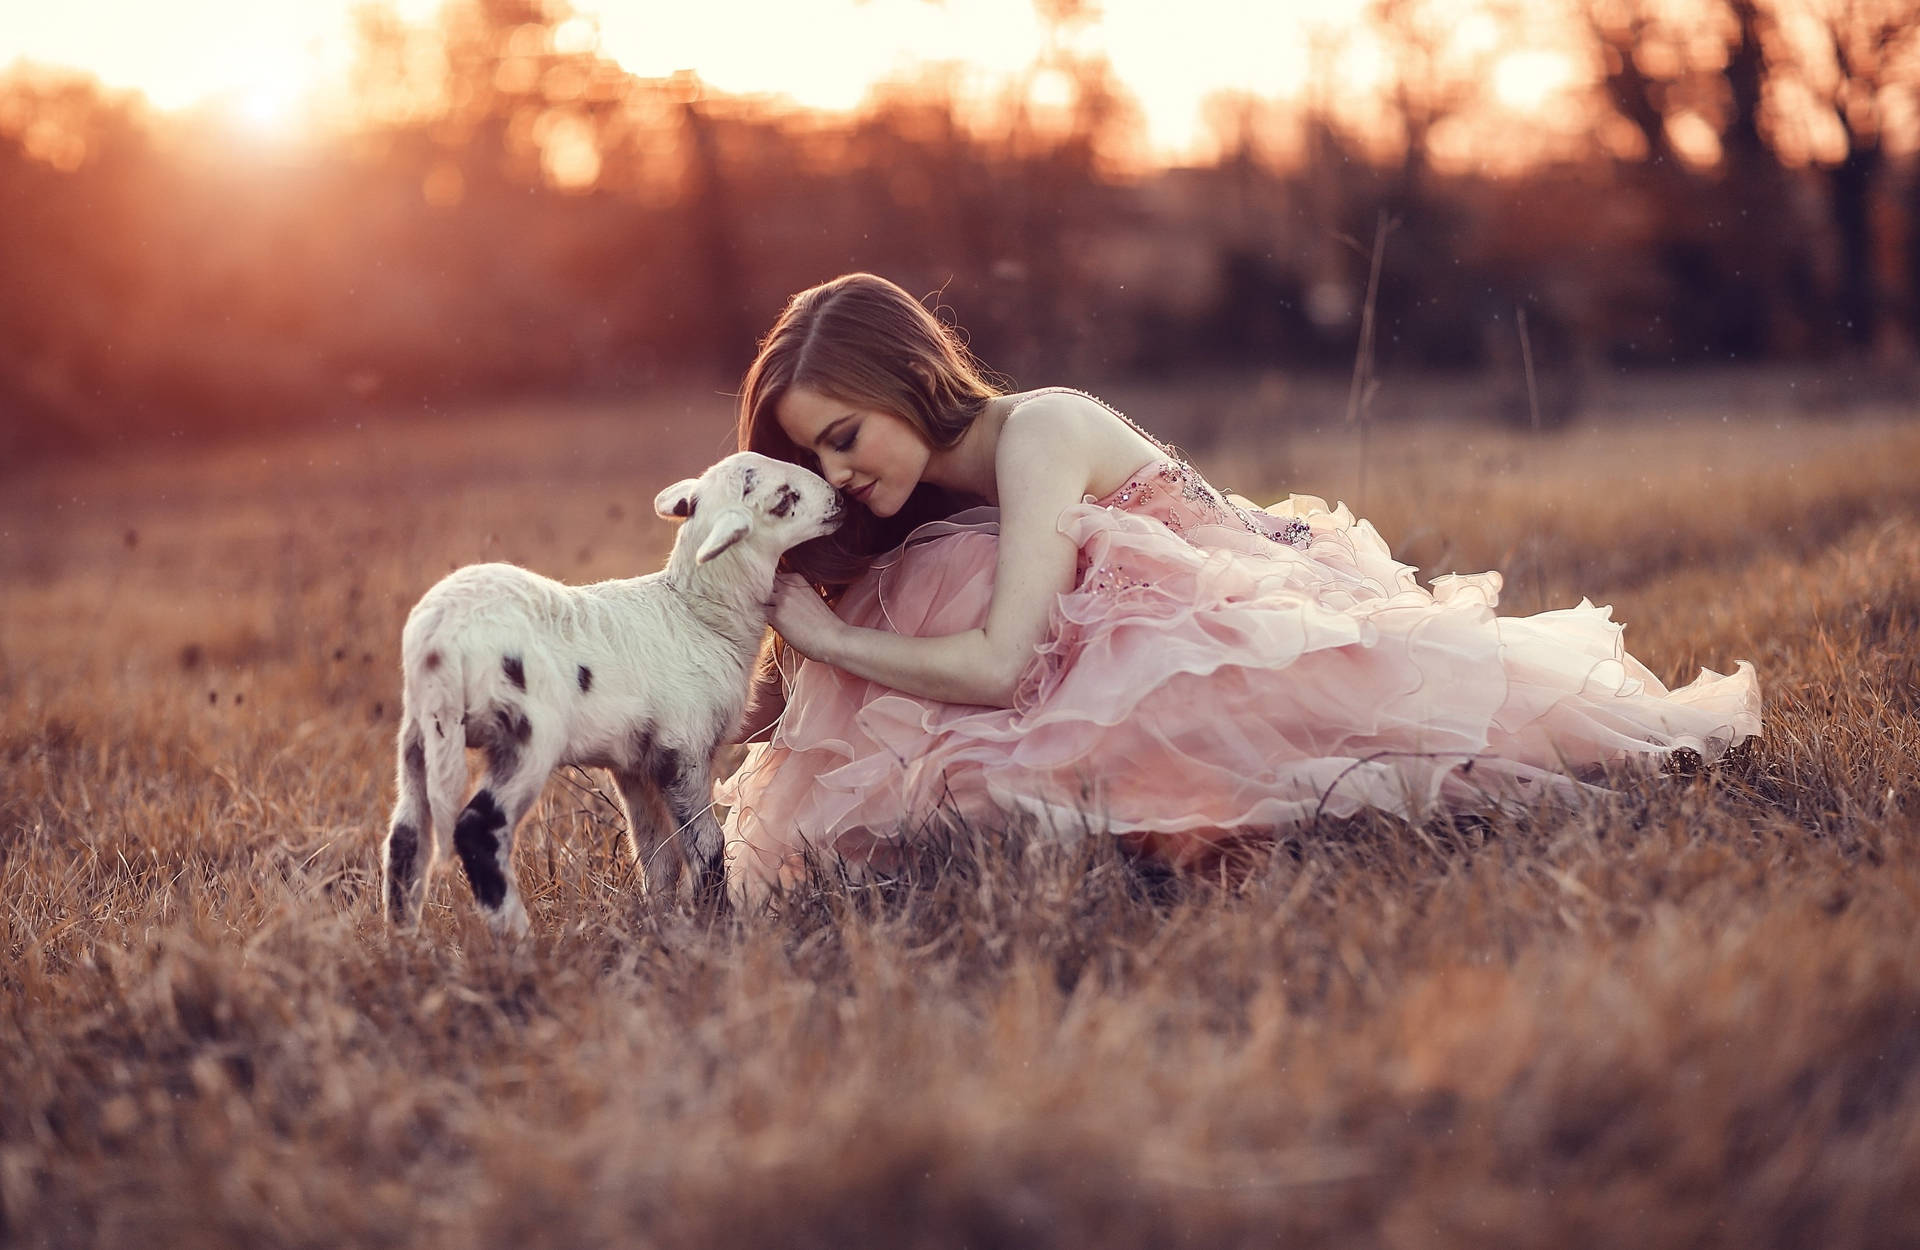 Lamb With Girl Vintage Aesthetic Wallpaper